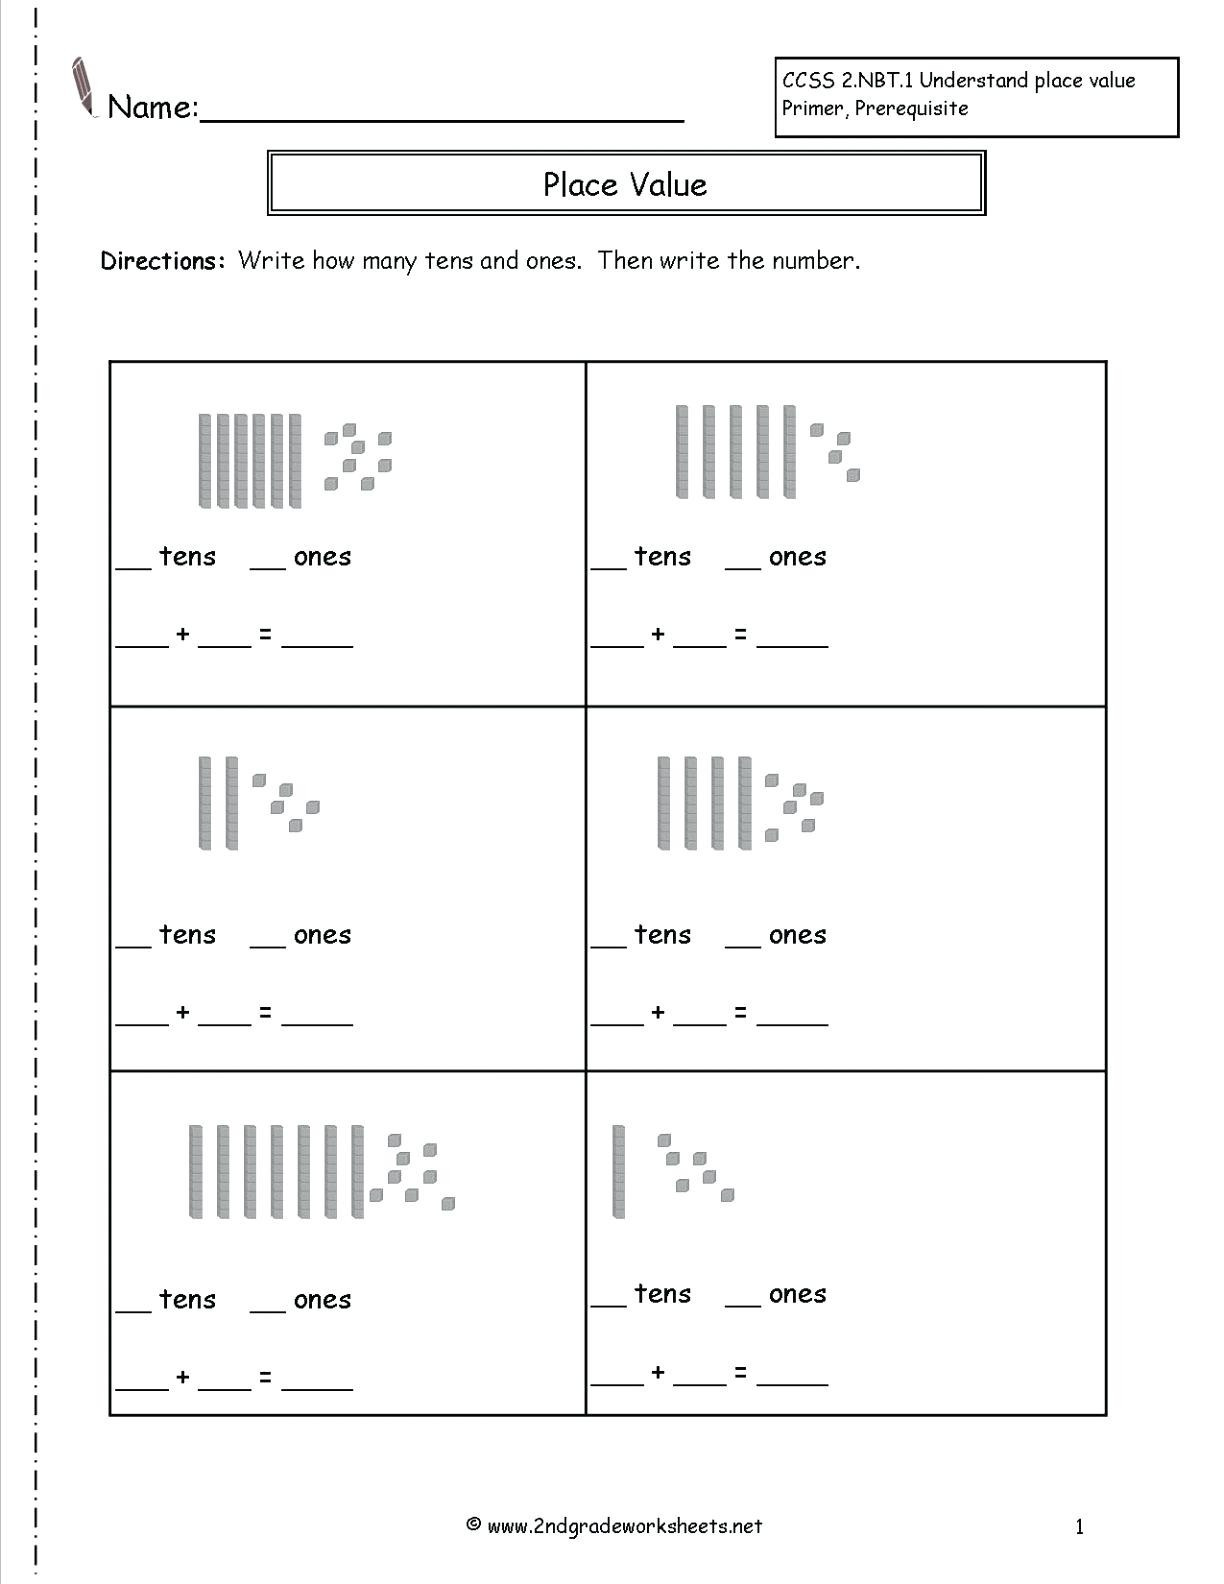 Place Value Worksheet 3rd Grade Place Value Worksheets 3rd Grade for Learning Place Value